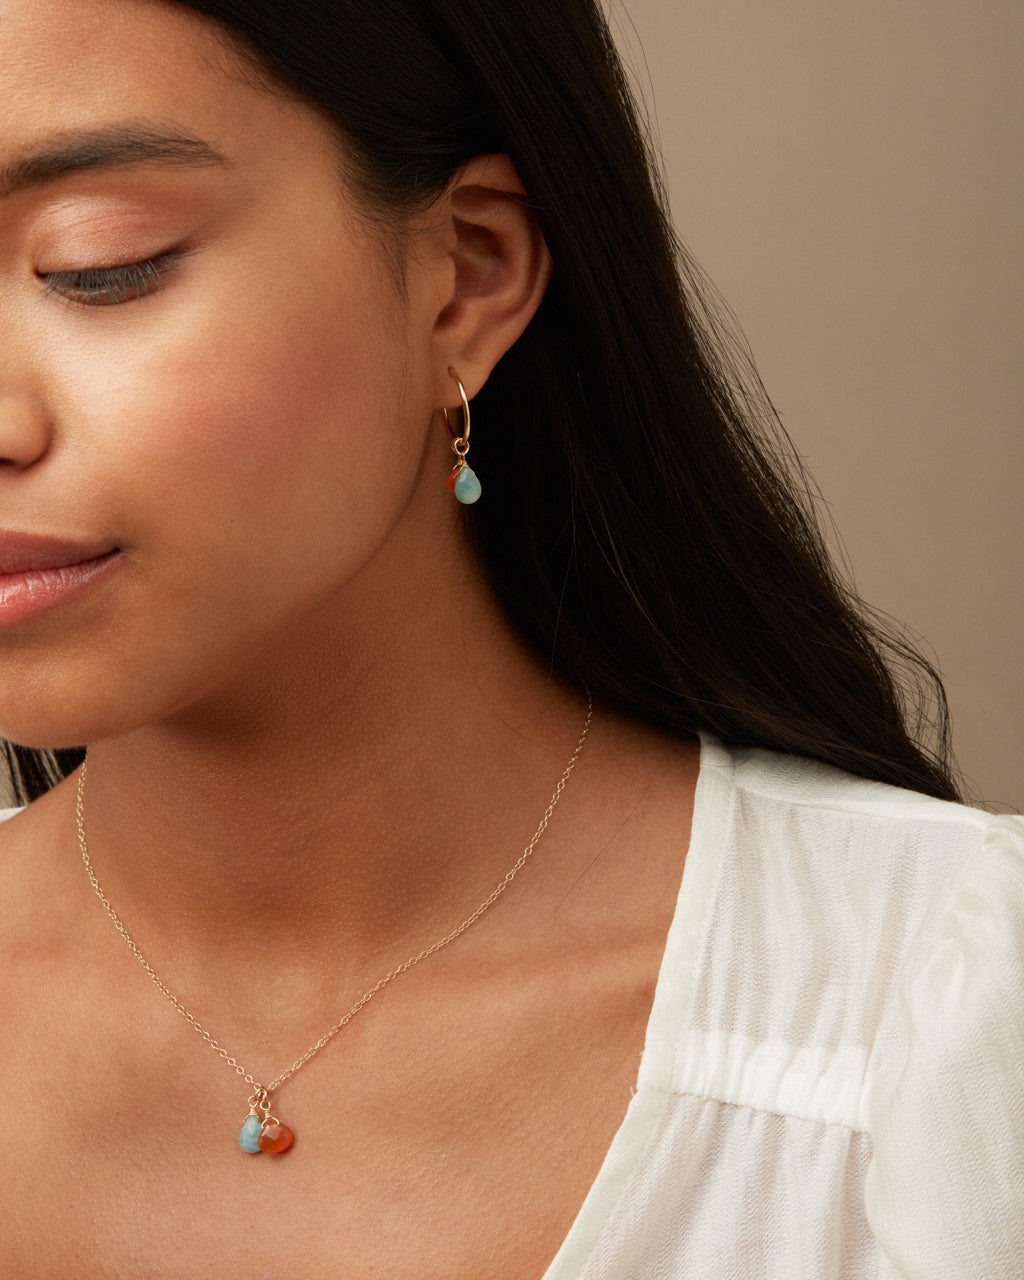 14K Gold Filled Amazonite & Carnelian Necklace | Inspiration Her